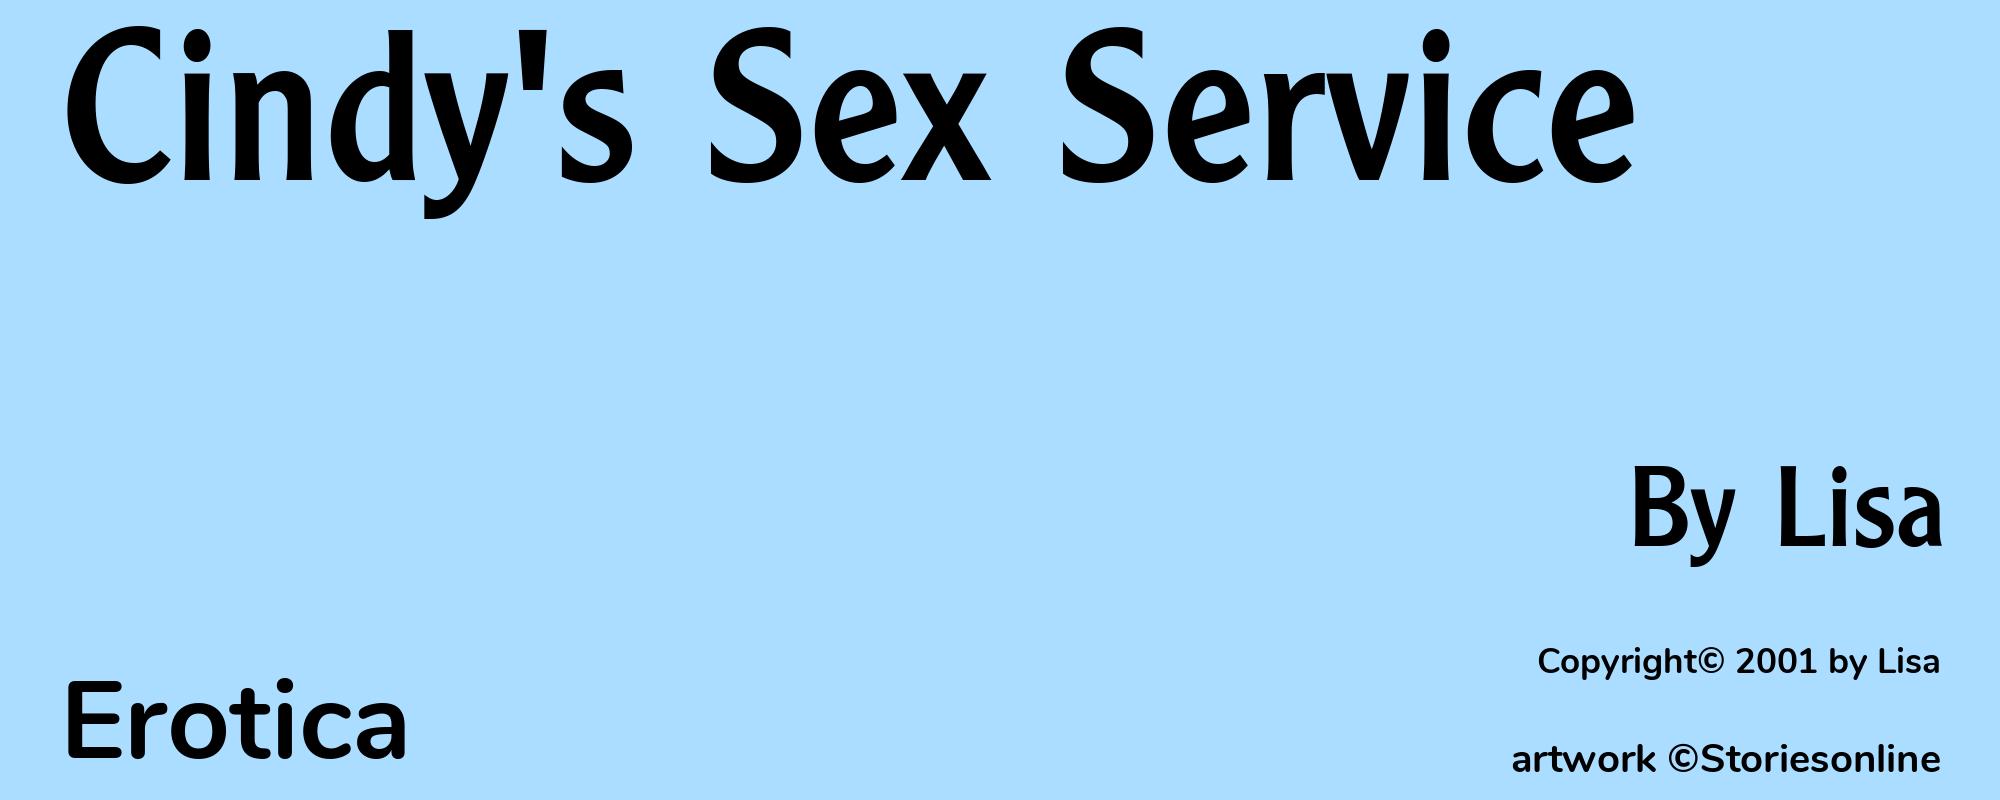 Cindy's Sex Service - Cover